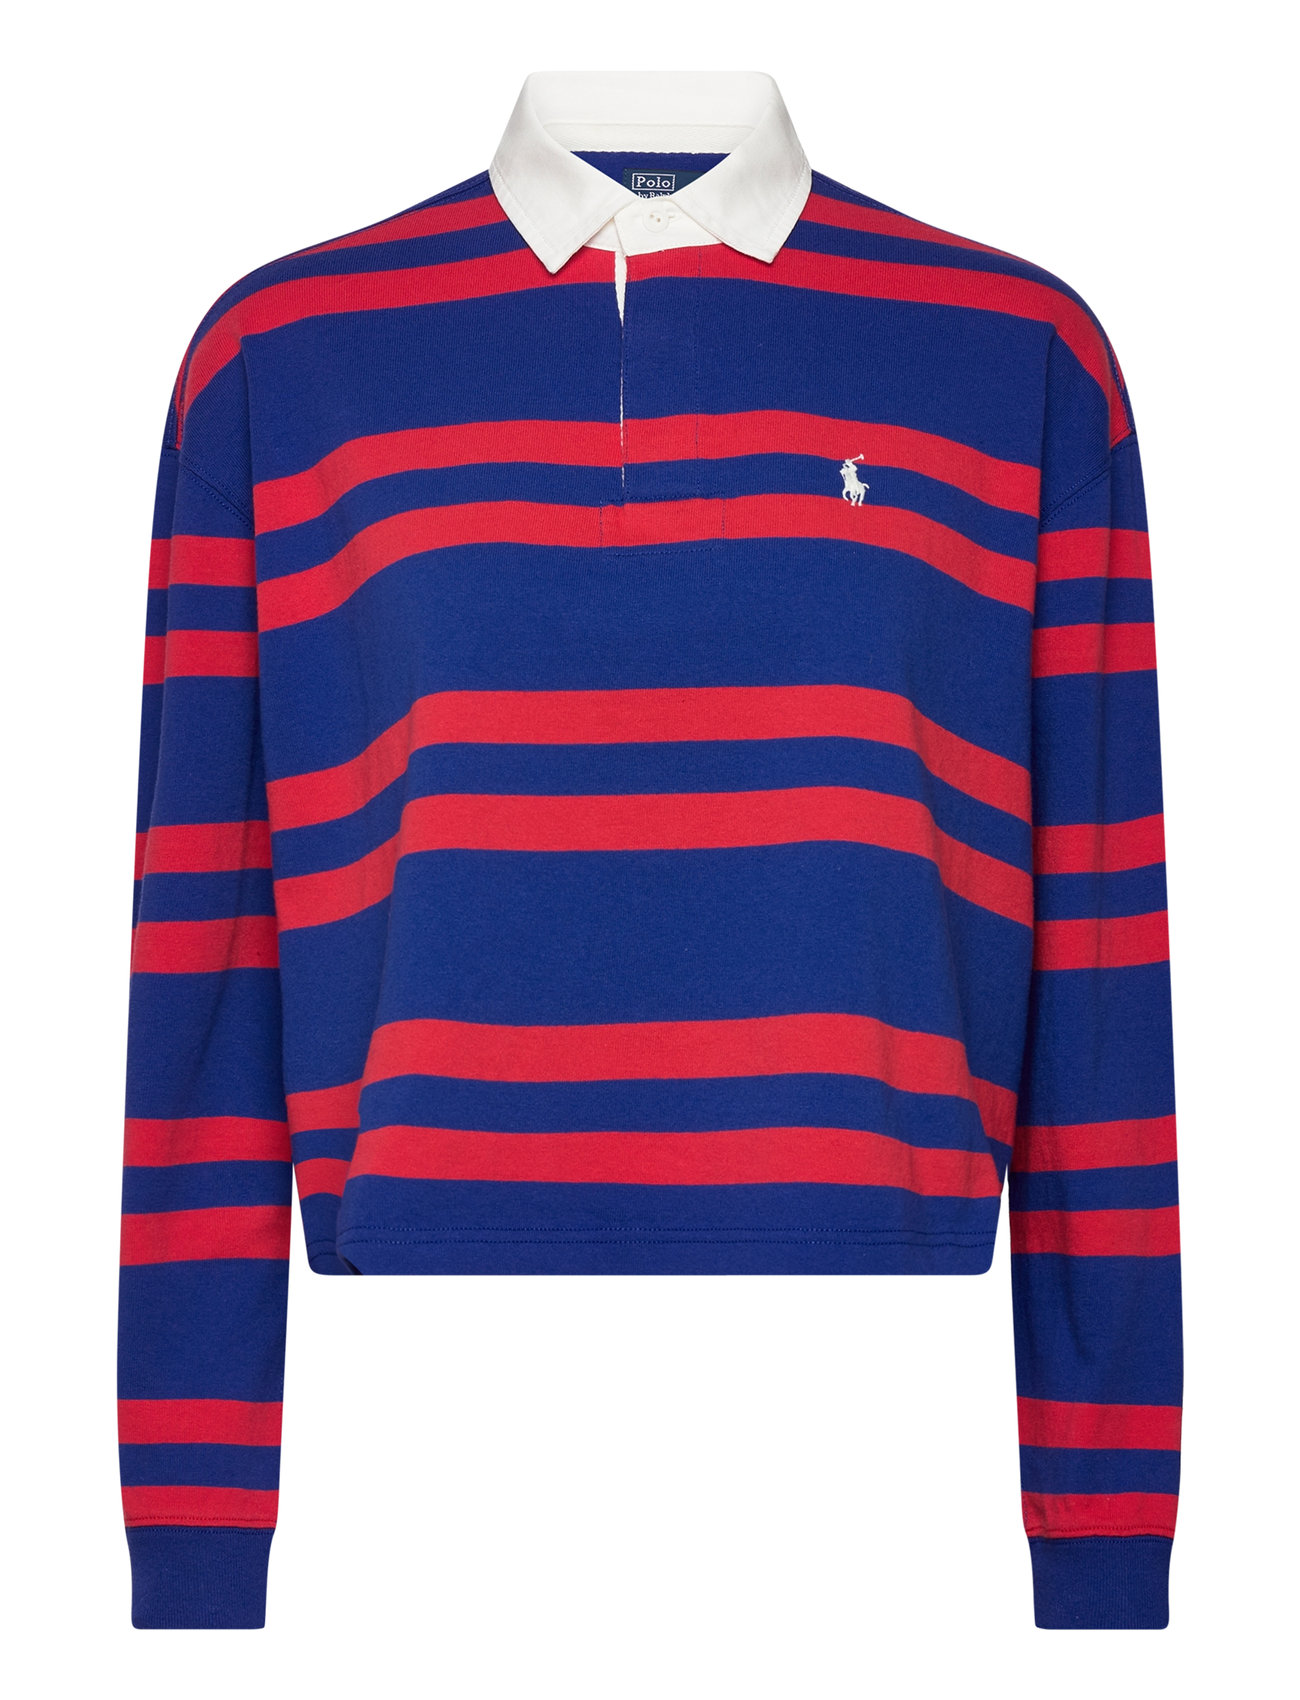 Striped Cropped Jersey Rugby Shirt Tops T-shirts & Tops Long-sleeved Blue Polo Ralph Lauren